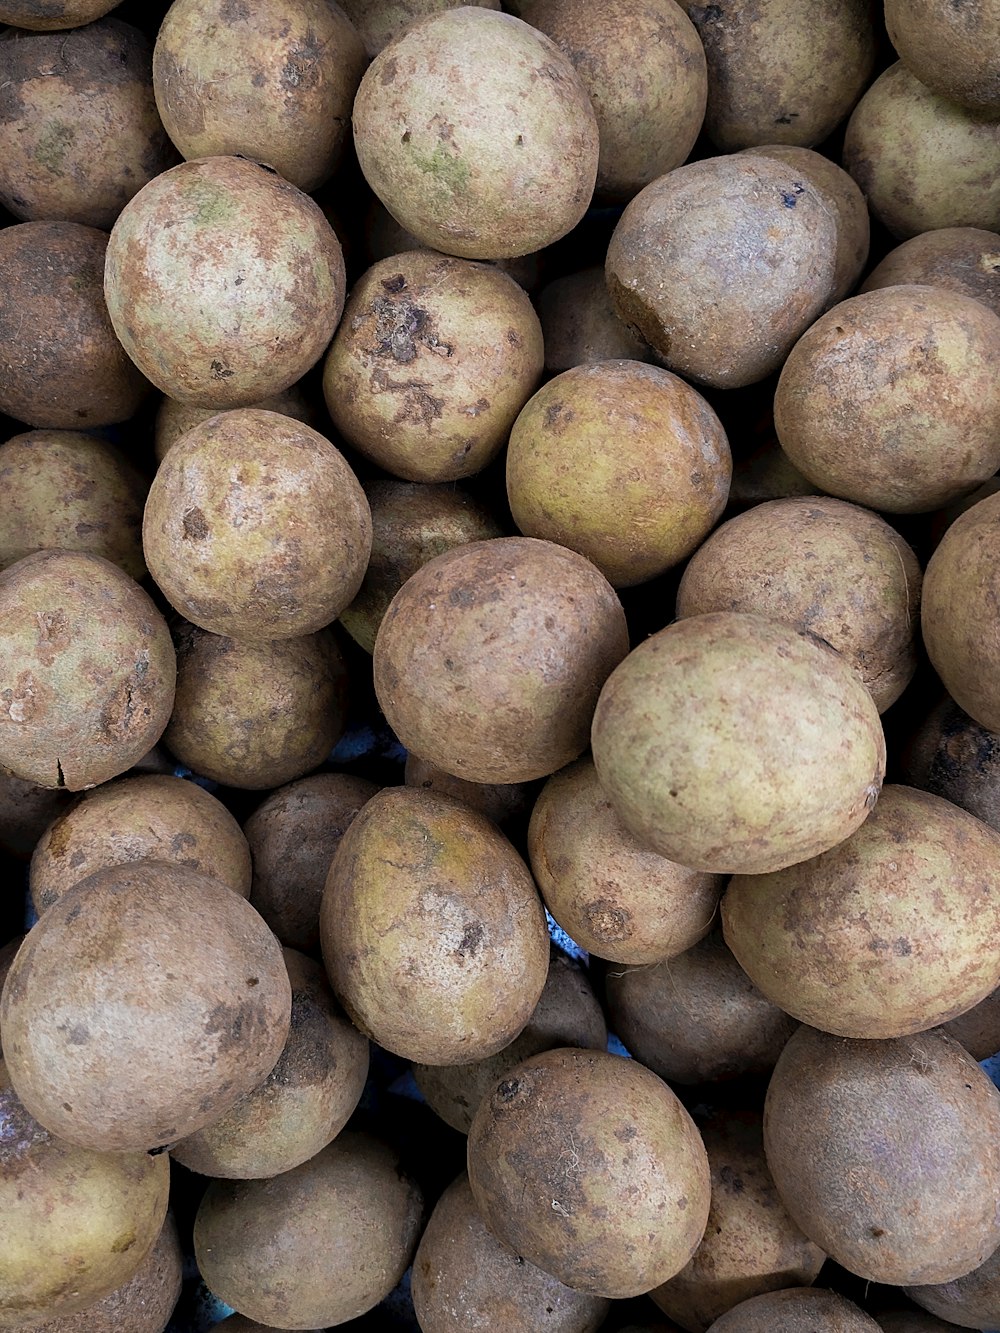 a pile of potatoes sitting next to each other